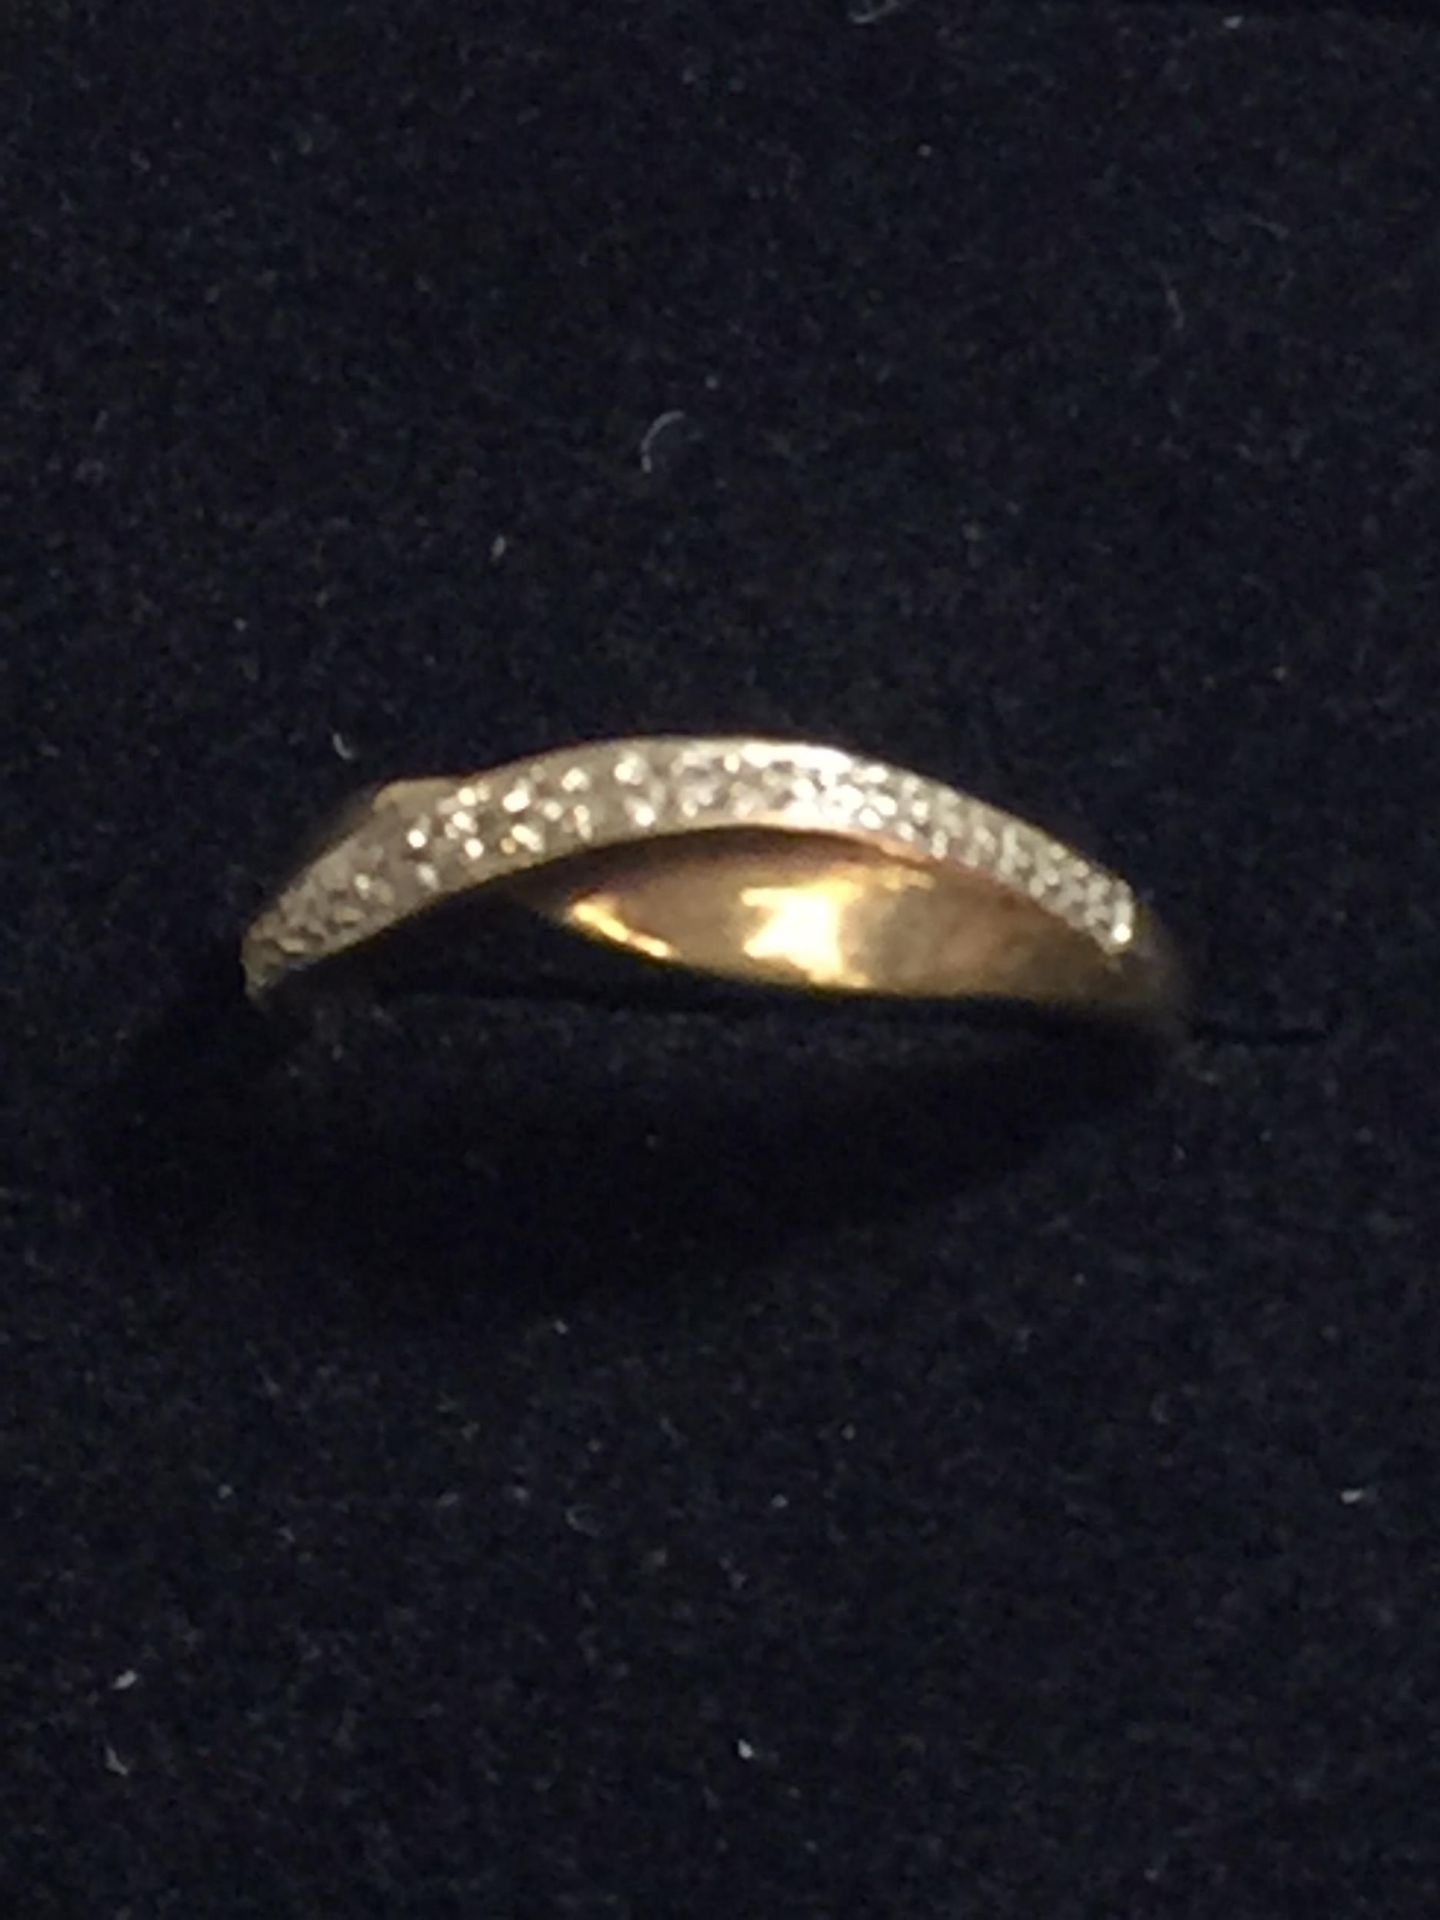 A 9CT GOLD CROSSOVER RING WITH DIAMONDS, WEIGHT 1.4G, SIZE J